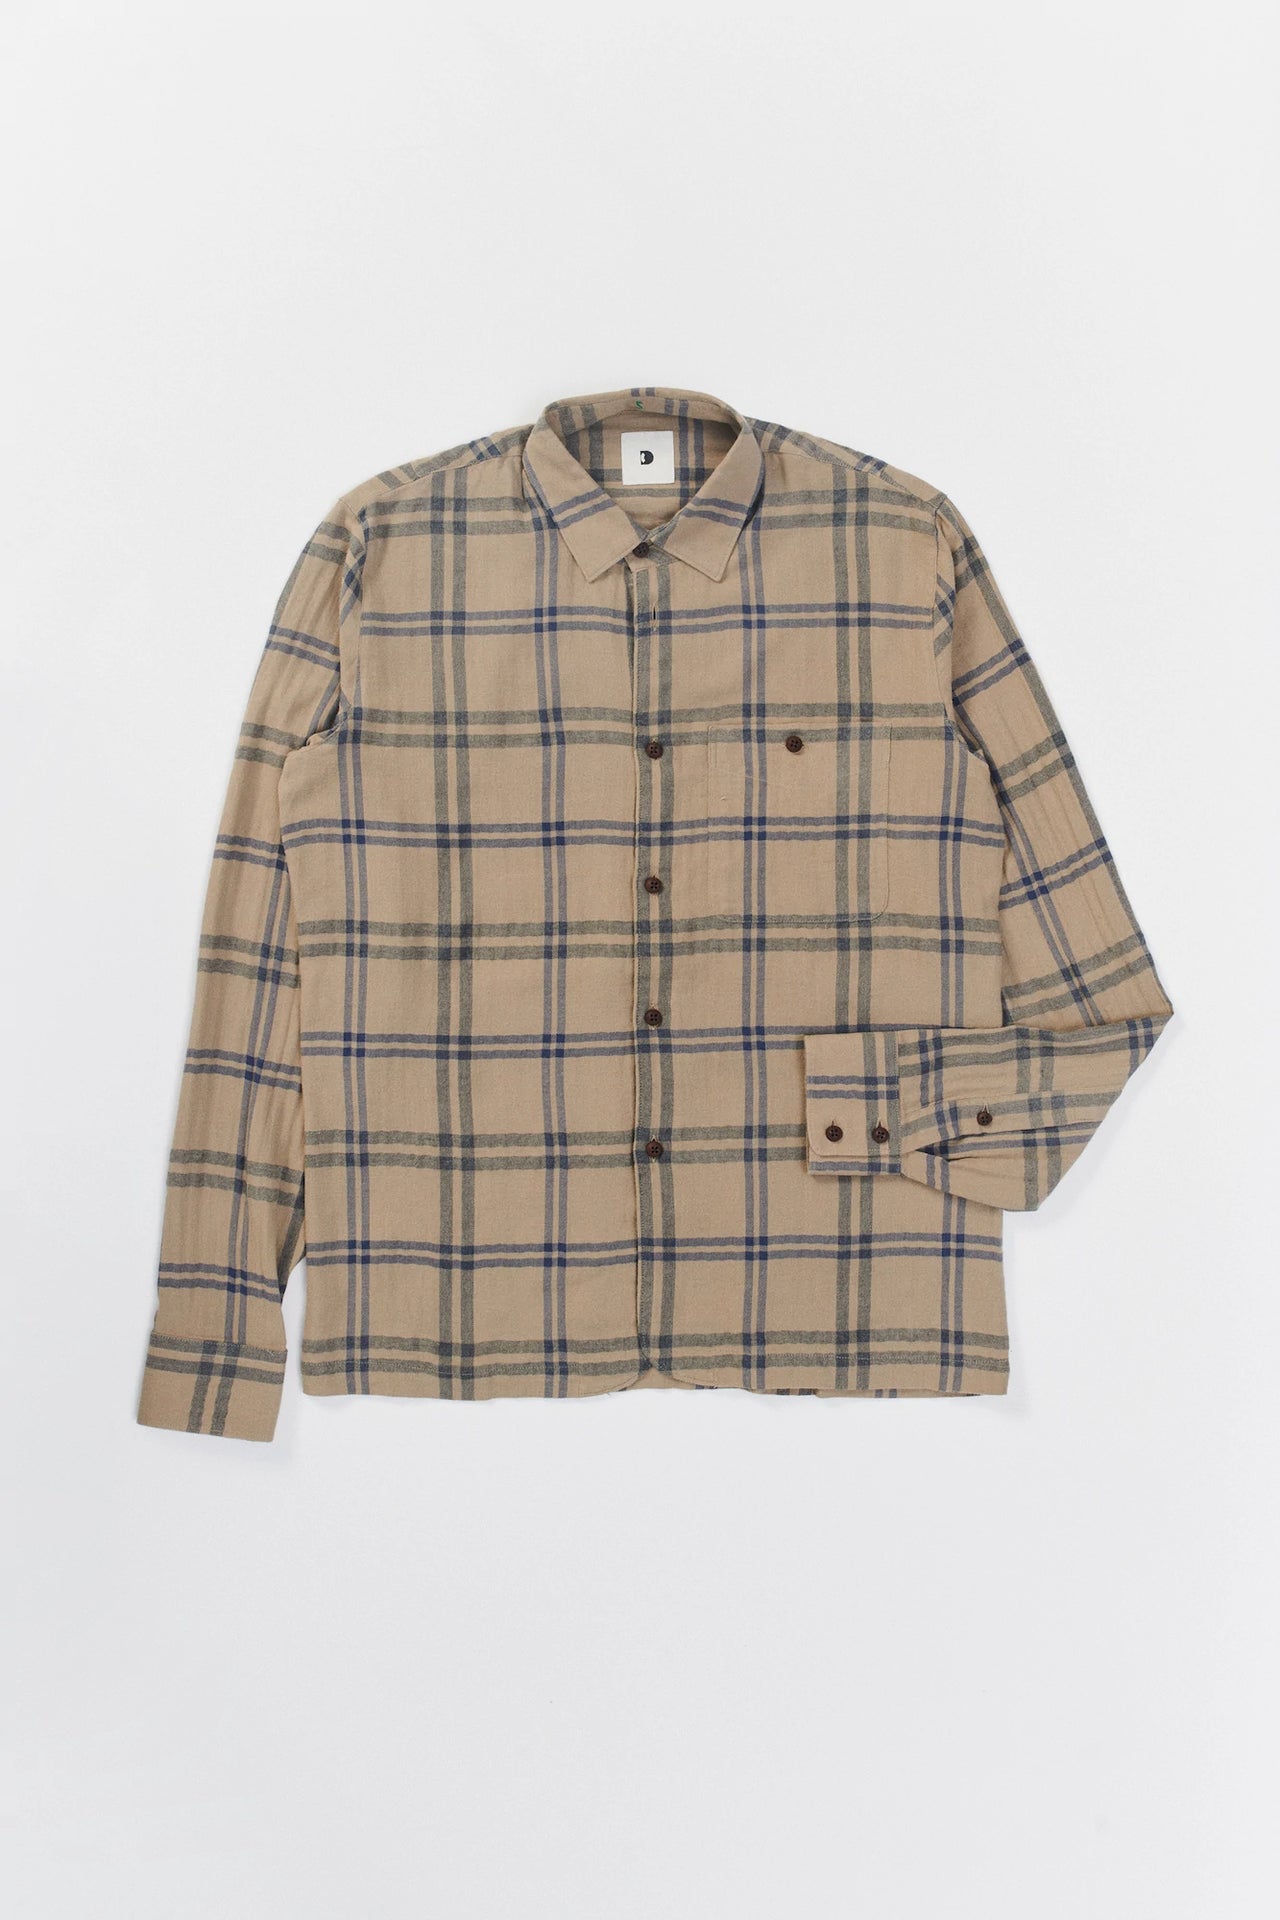 Strong Shirt in a Beige Blue Chequered Fine Japanese Cotton Flannel